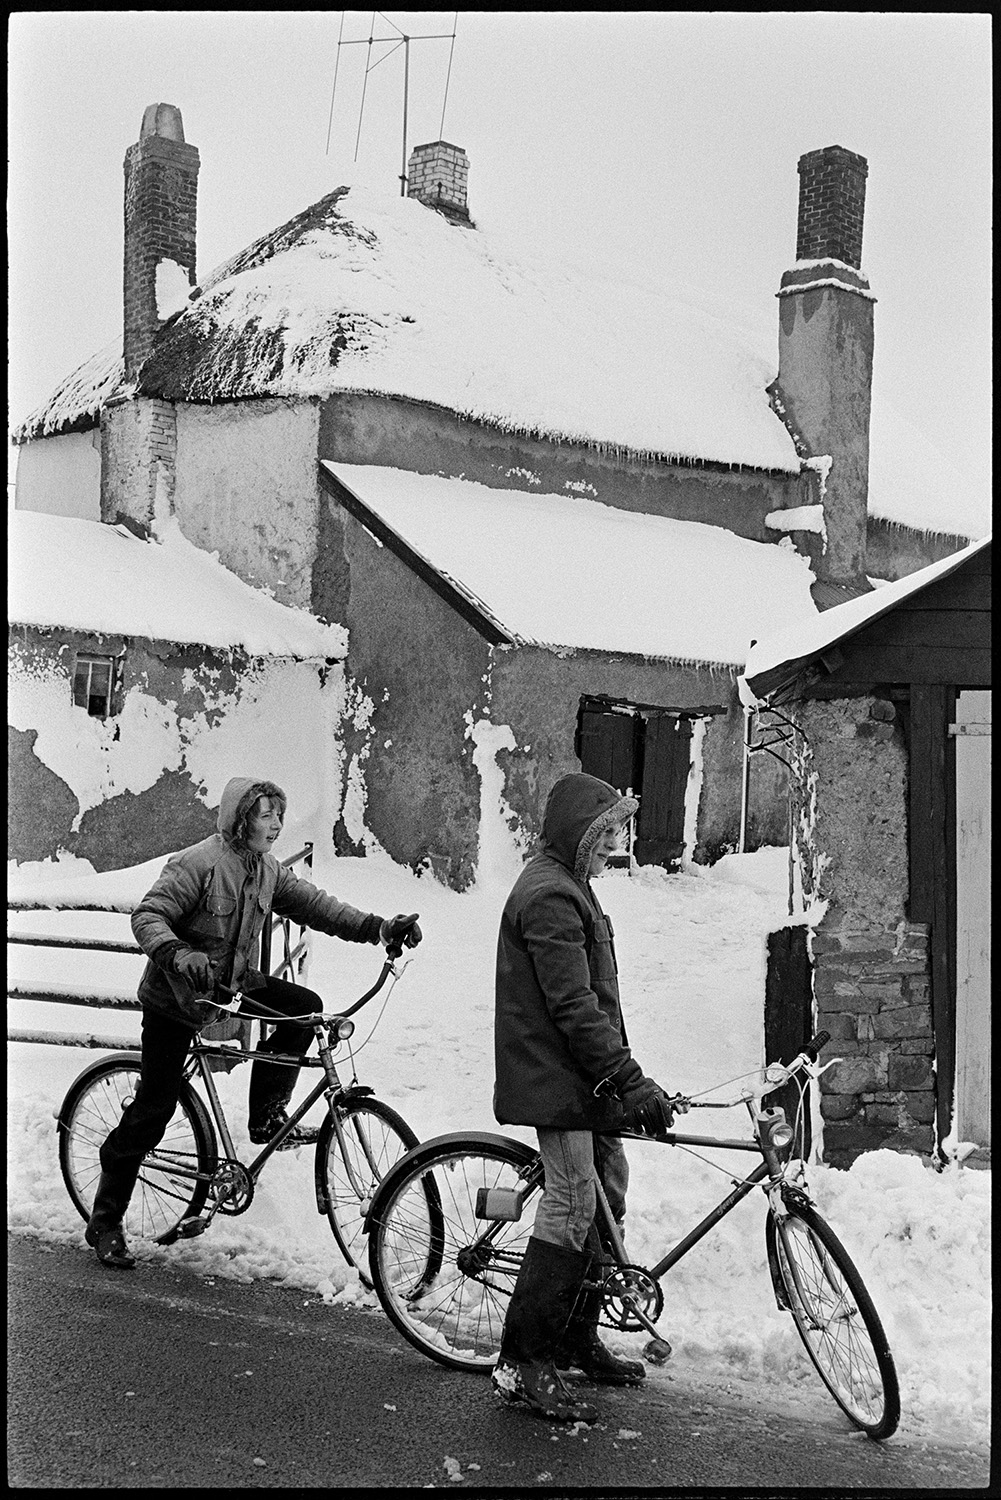 Two boys on bicycles in front of snow covered farm. 
[The Lane brothers riding their bicycles past a snow covered thatched farmhouse in Beaford.]